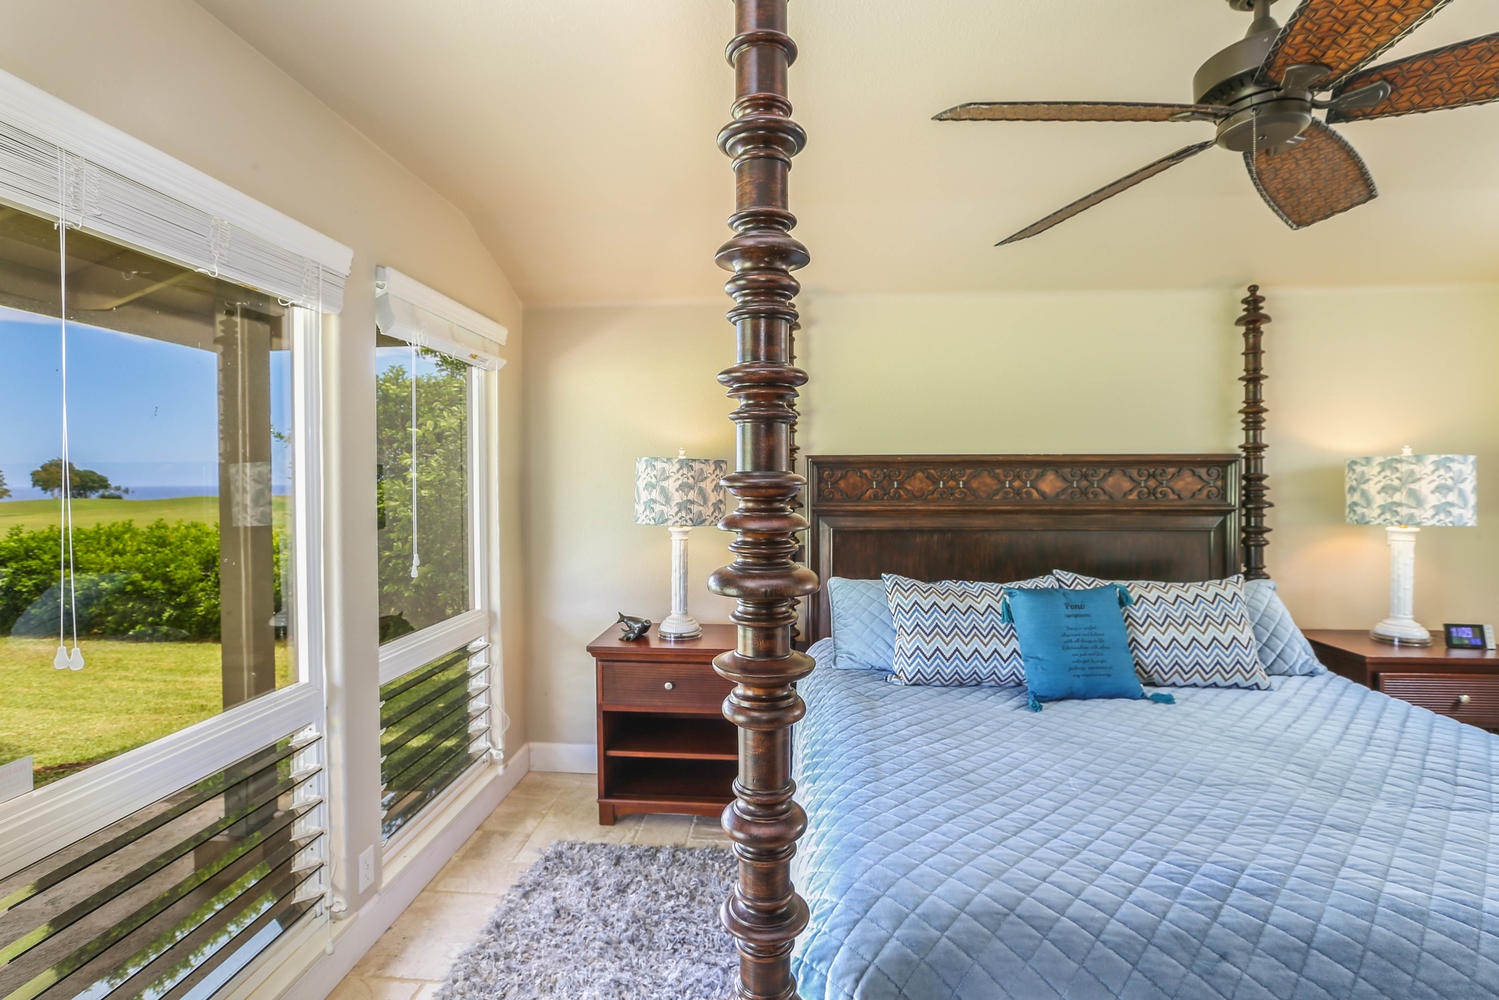 Princeville Vacation Rentals, Half Moon Hana - The perfect furnishings for your stay